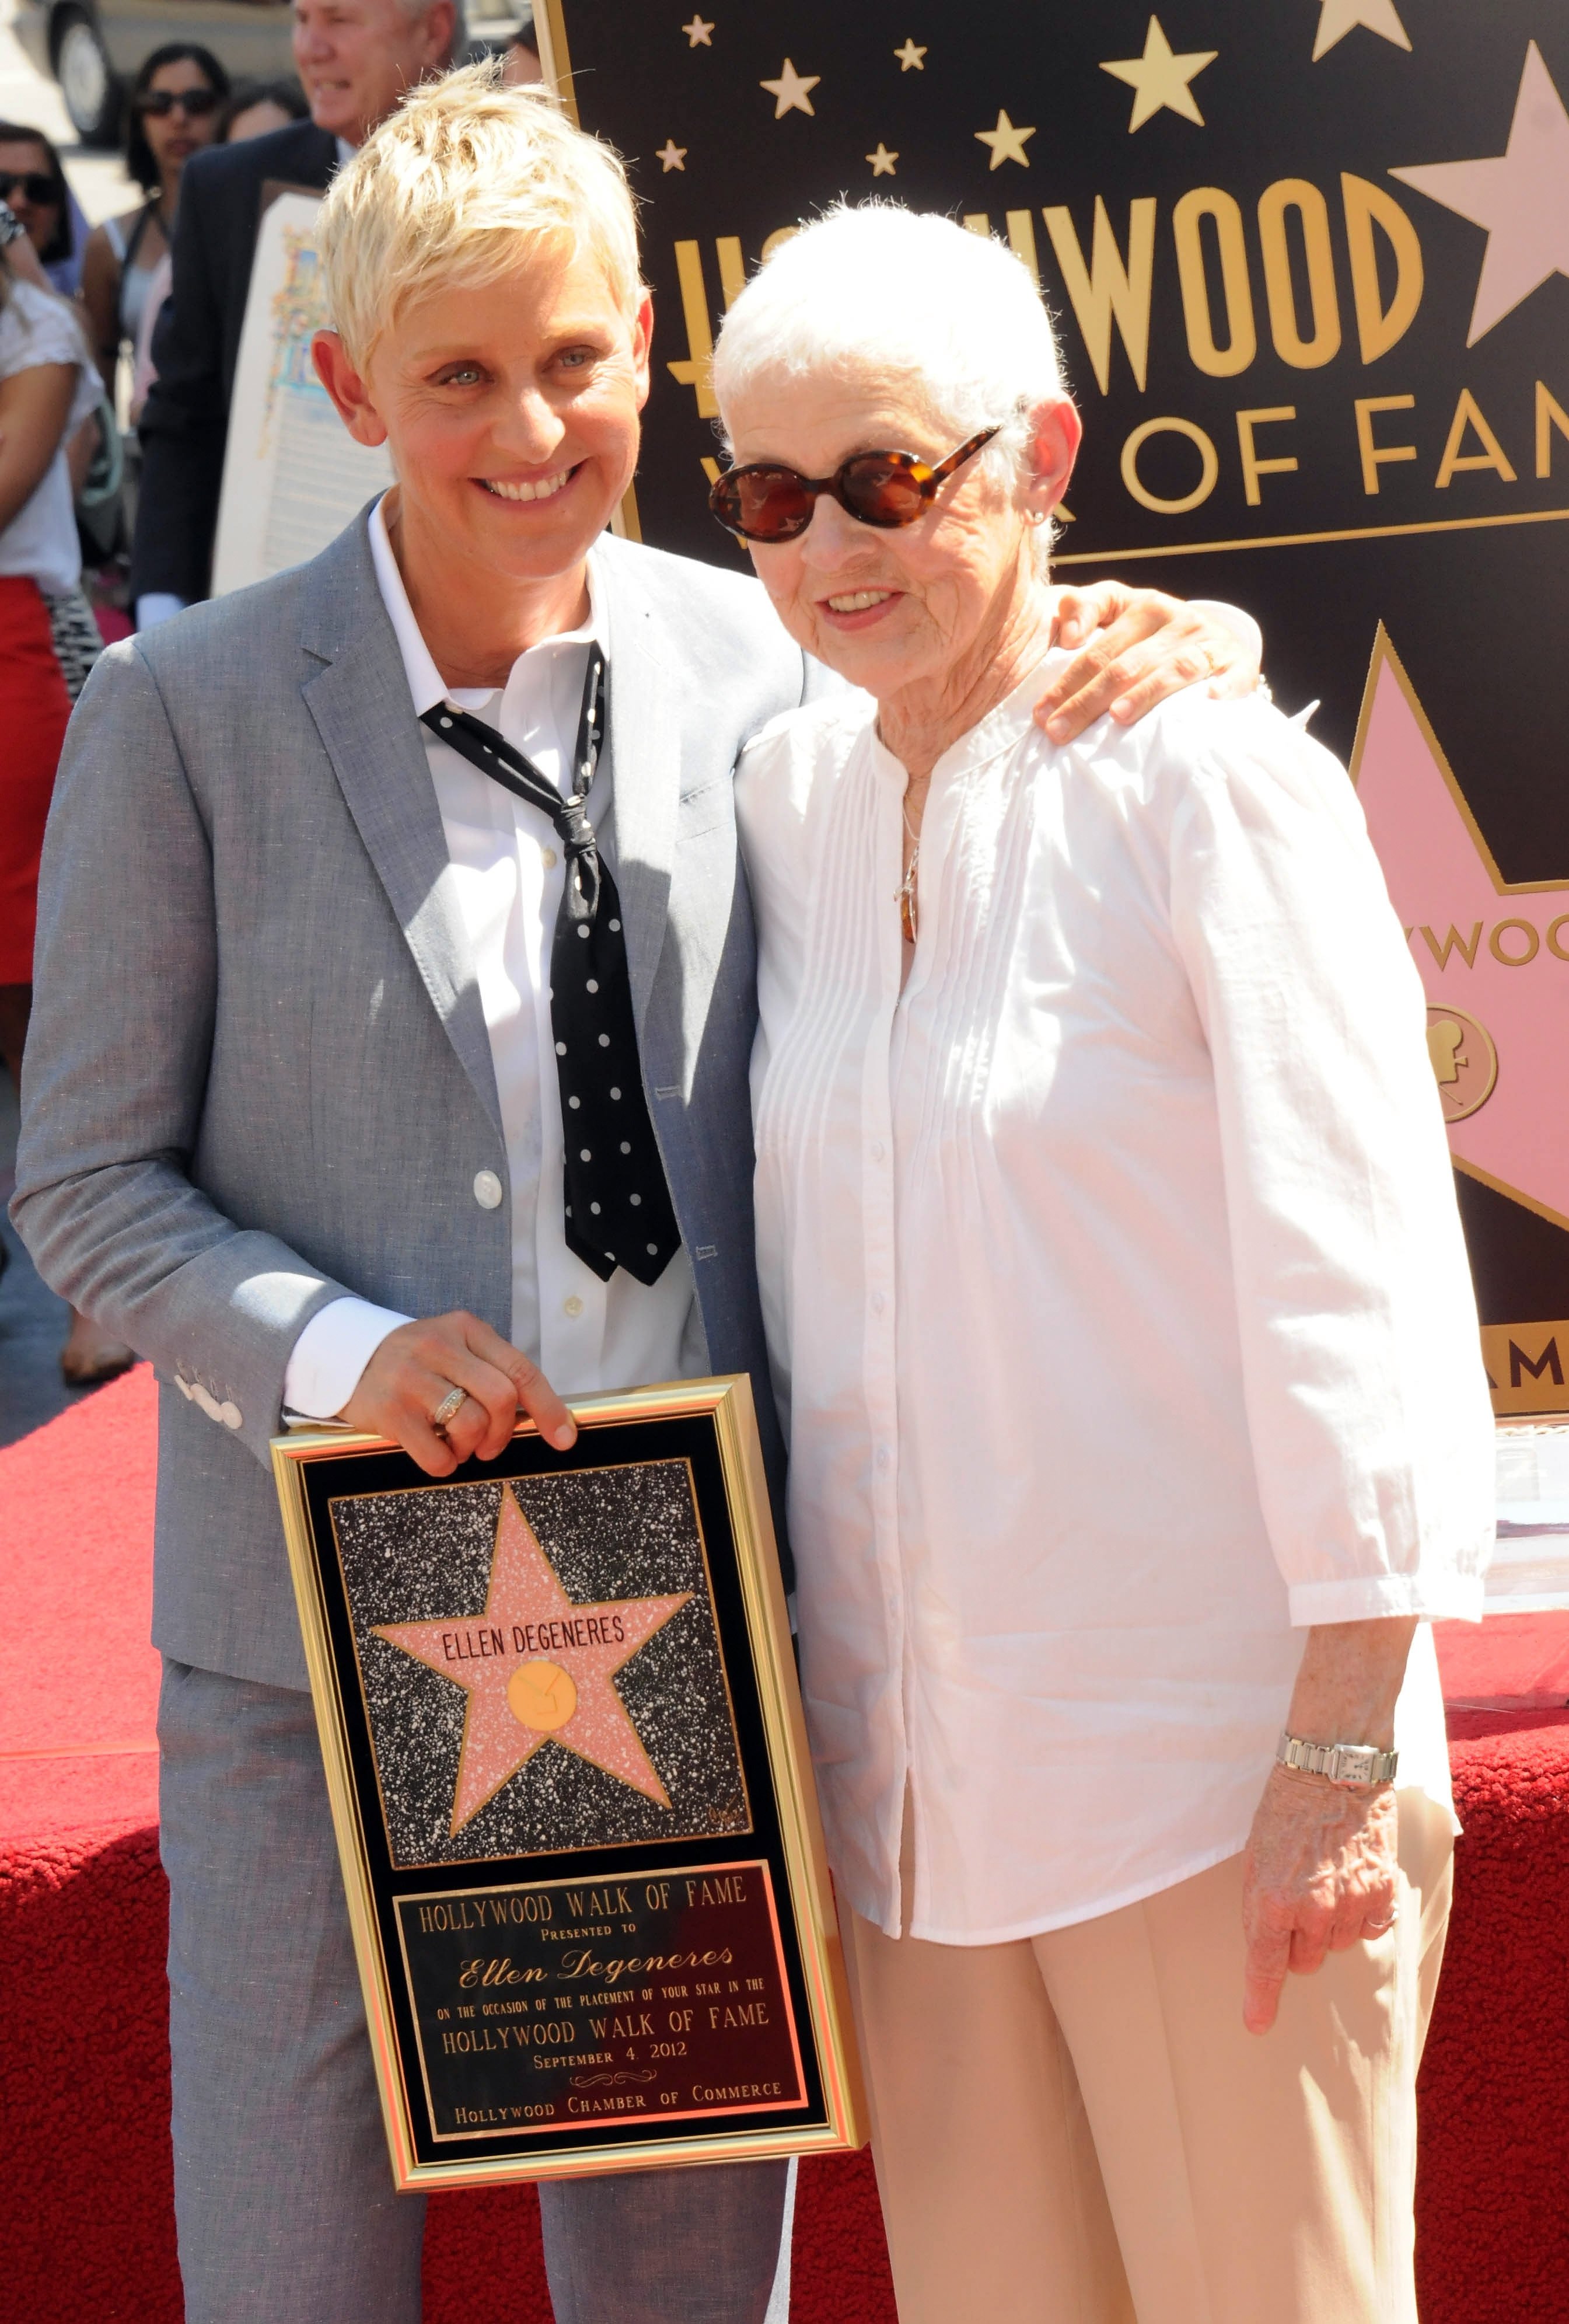 Ellen Degeneres and mother Betty De generes is honored with a Star on the Hollywood Walk of Fame on September 4, 2012 | Photo: GettyImages